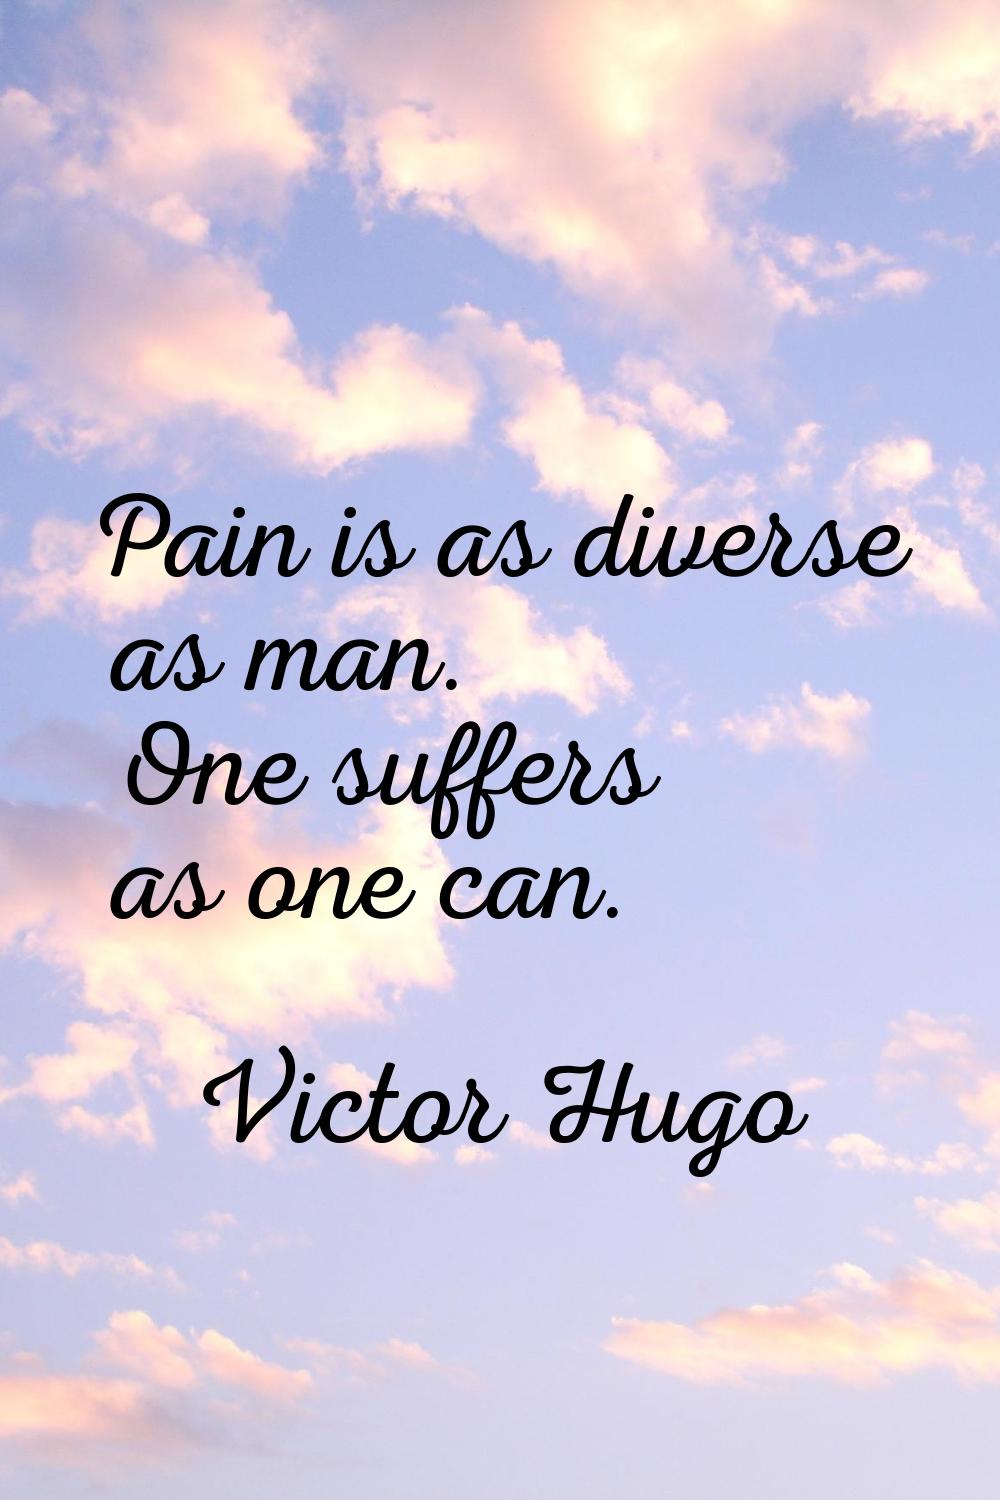 Pain is as diverse as man. One suffers as one can.